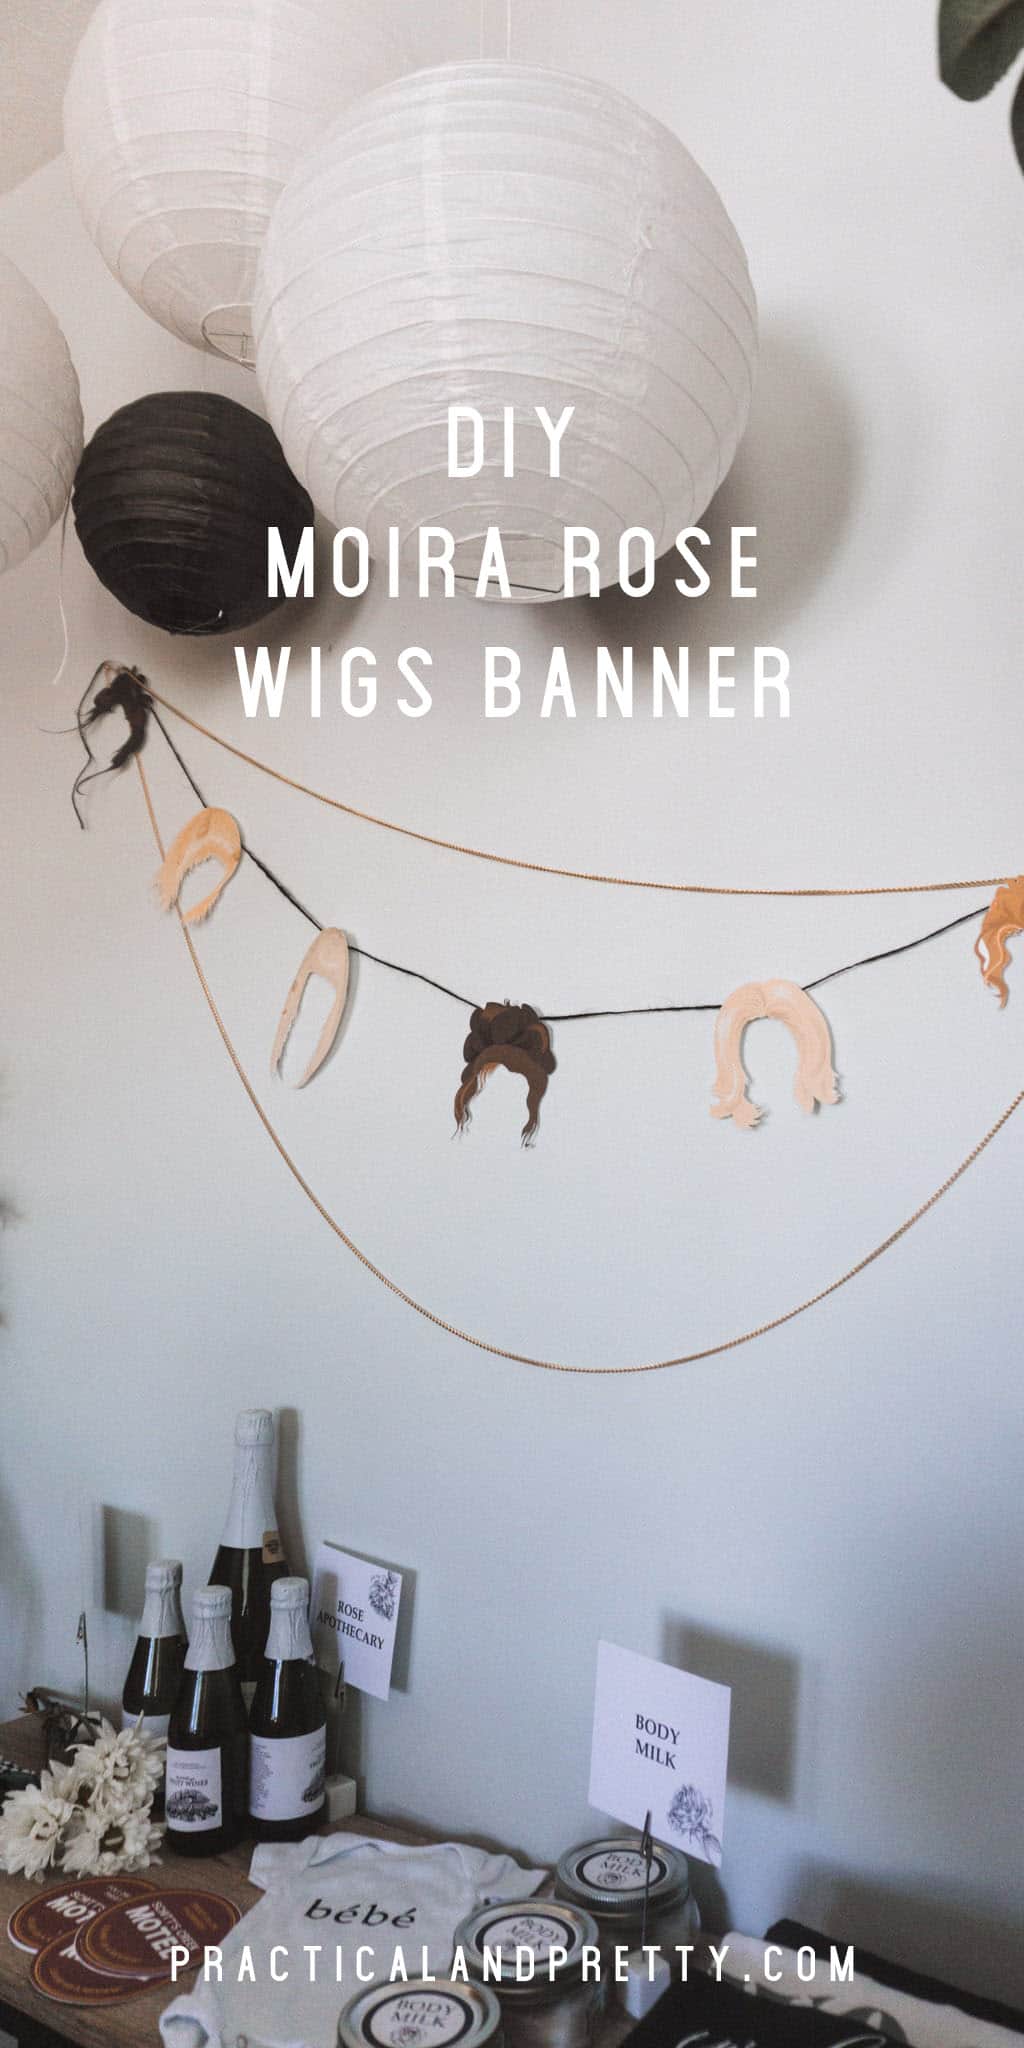 If you're throwing any sort of event about Schitt's Creek you're going to obviously need this Moira Rose wigs banner. I mean how could you not?